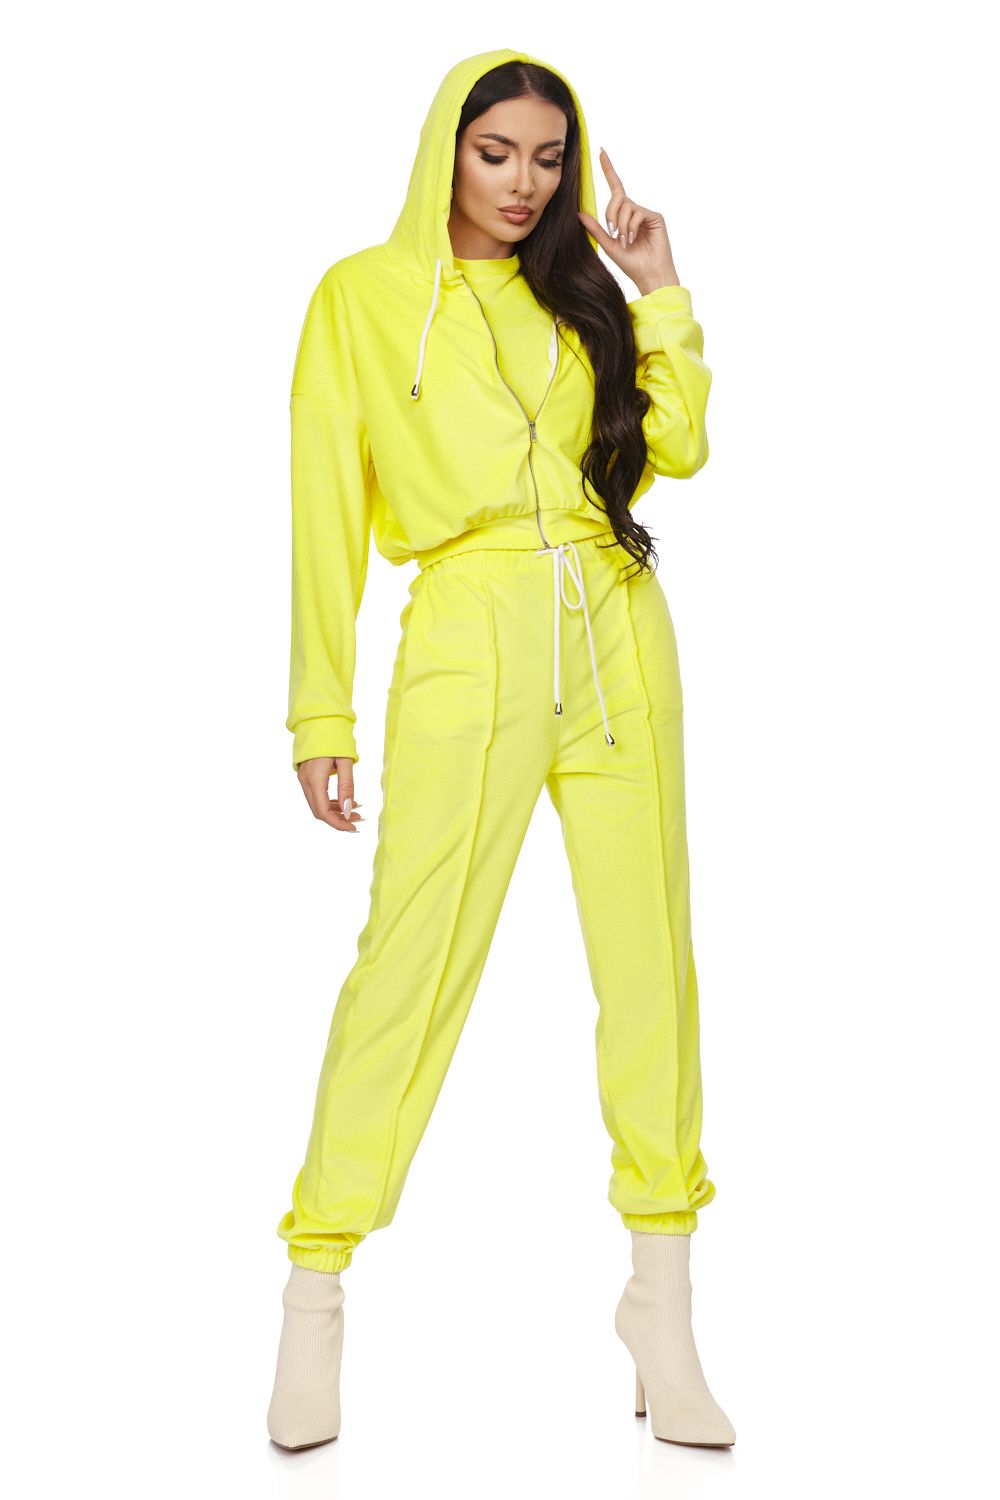 Melos Bogas casual yellow ladies' tracksuit